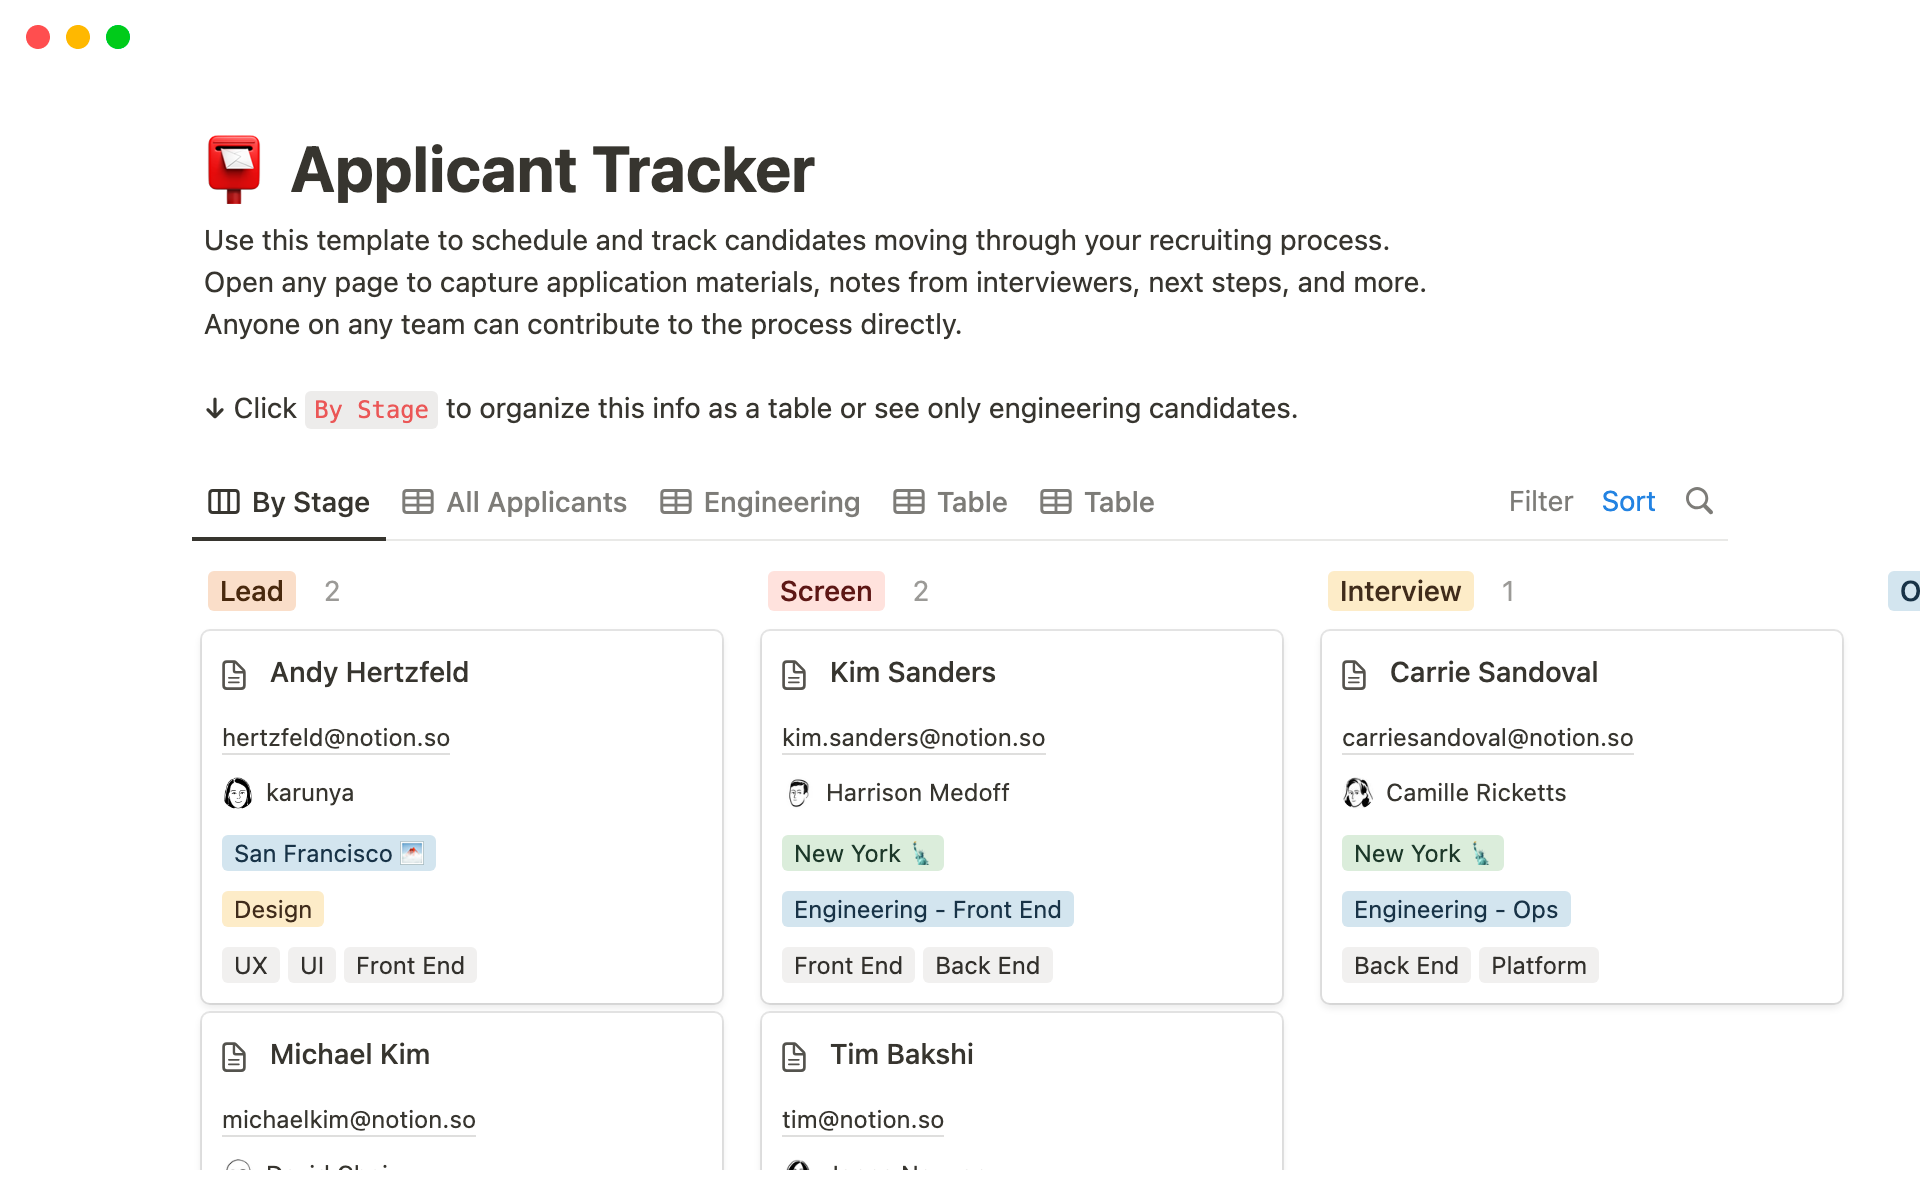 The desktop image for the applicant tracker template.